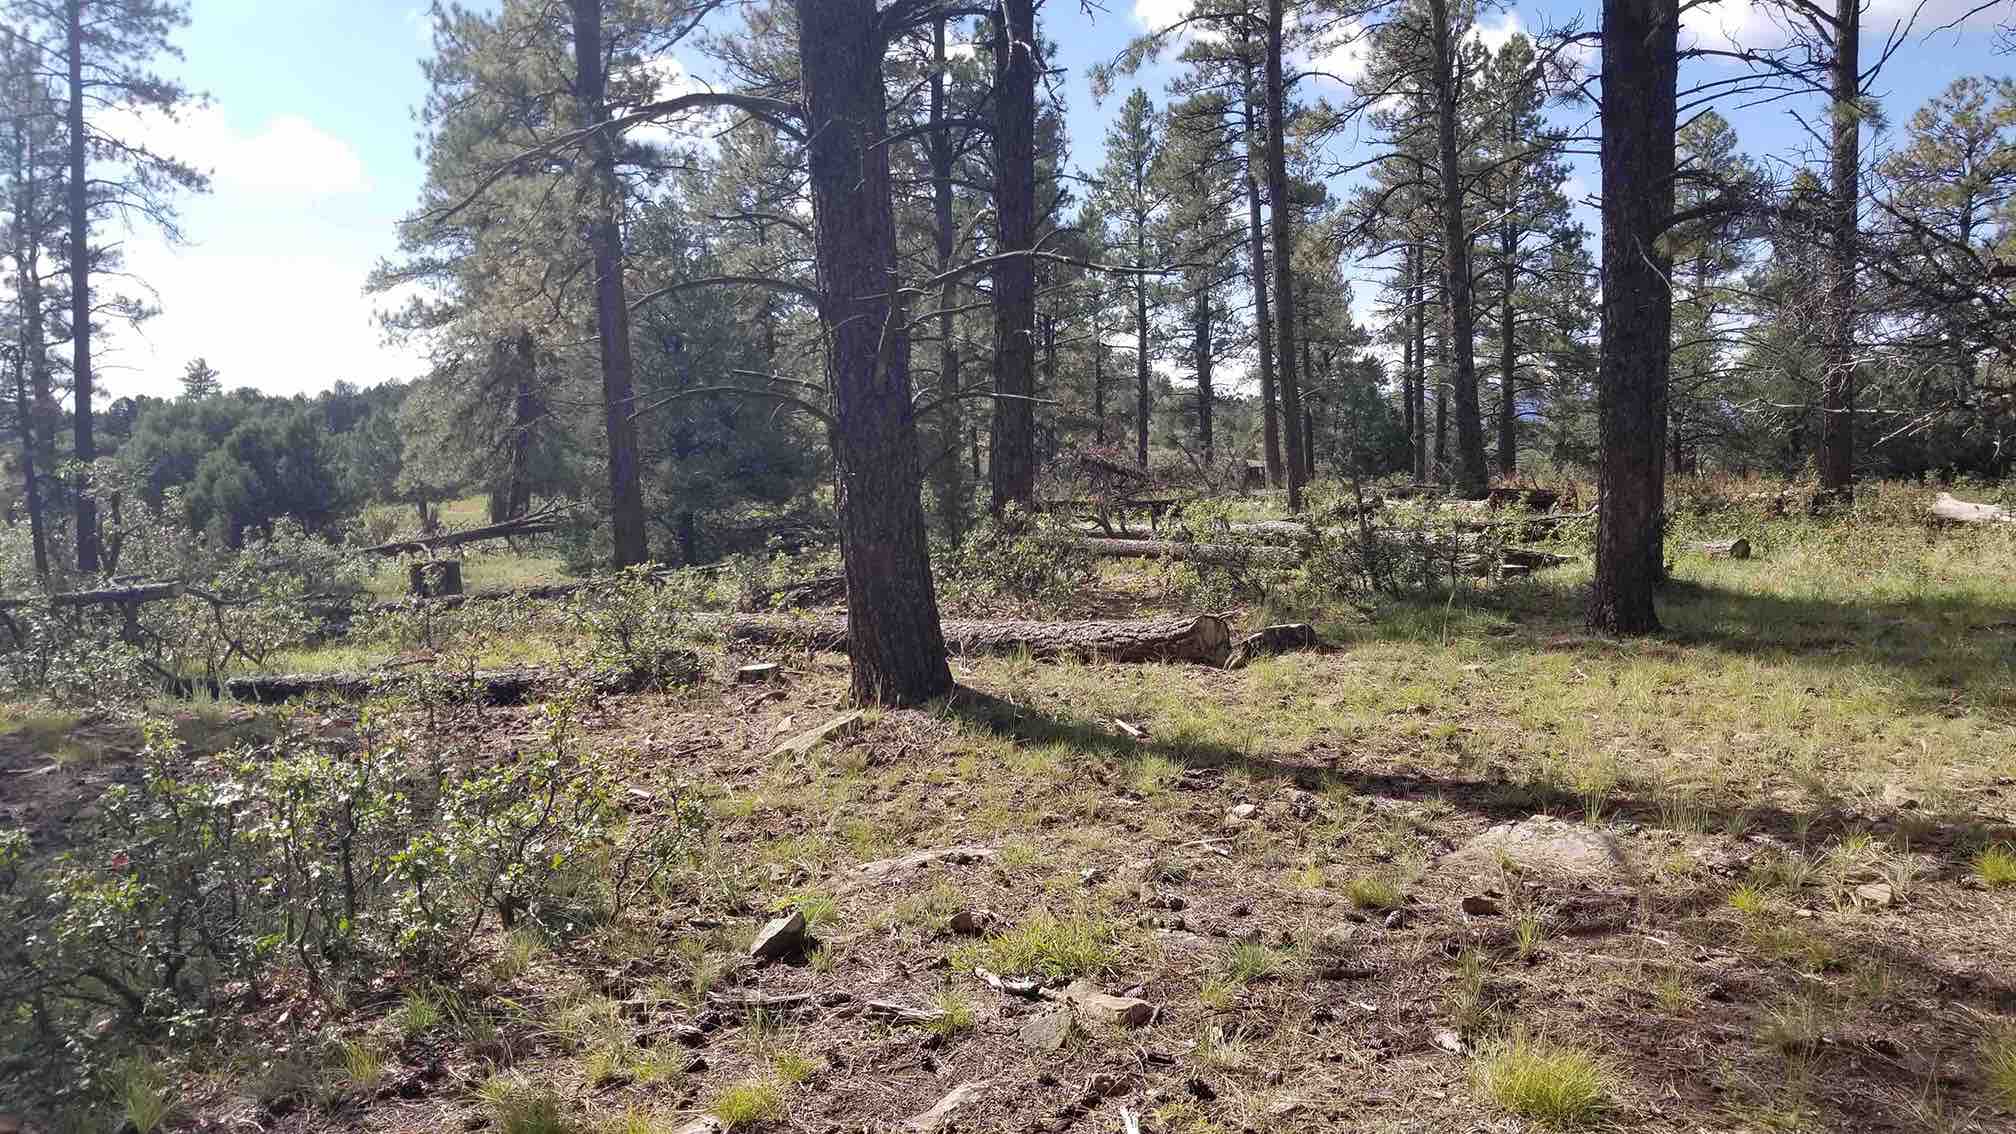 Adams ranch fuel break photo of forest with trees that have been cut down